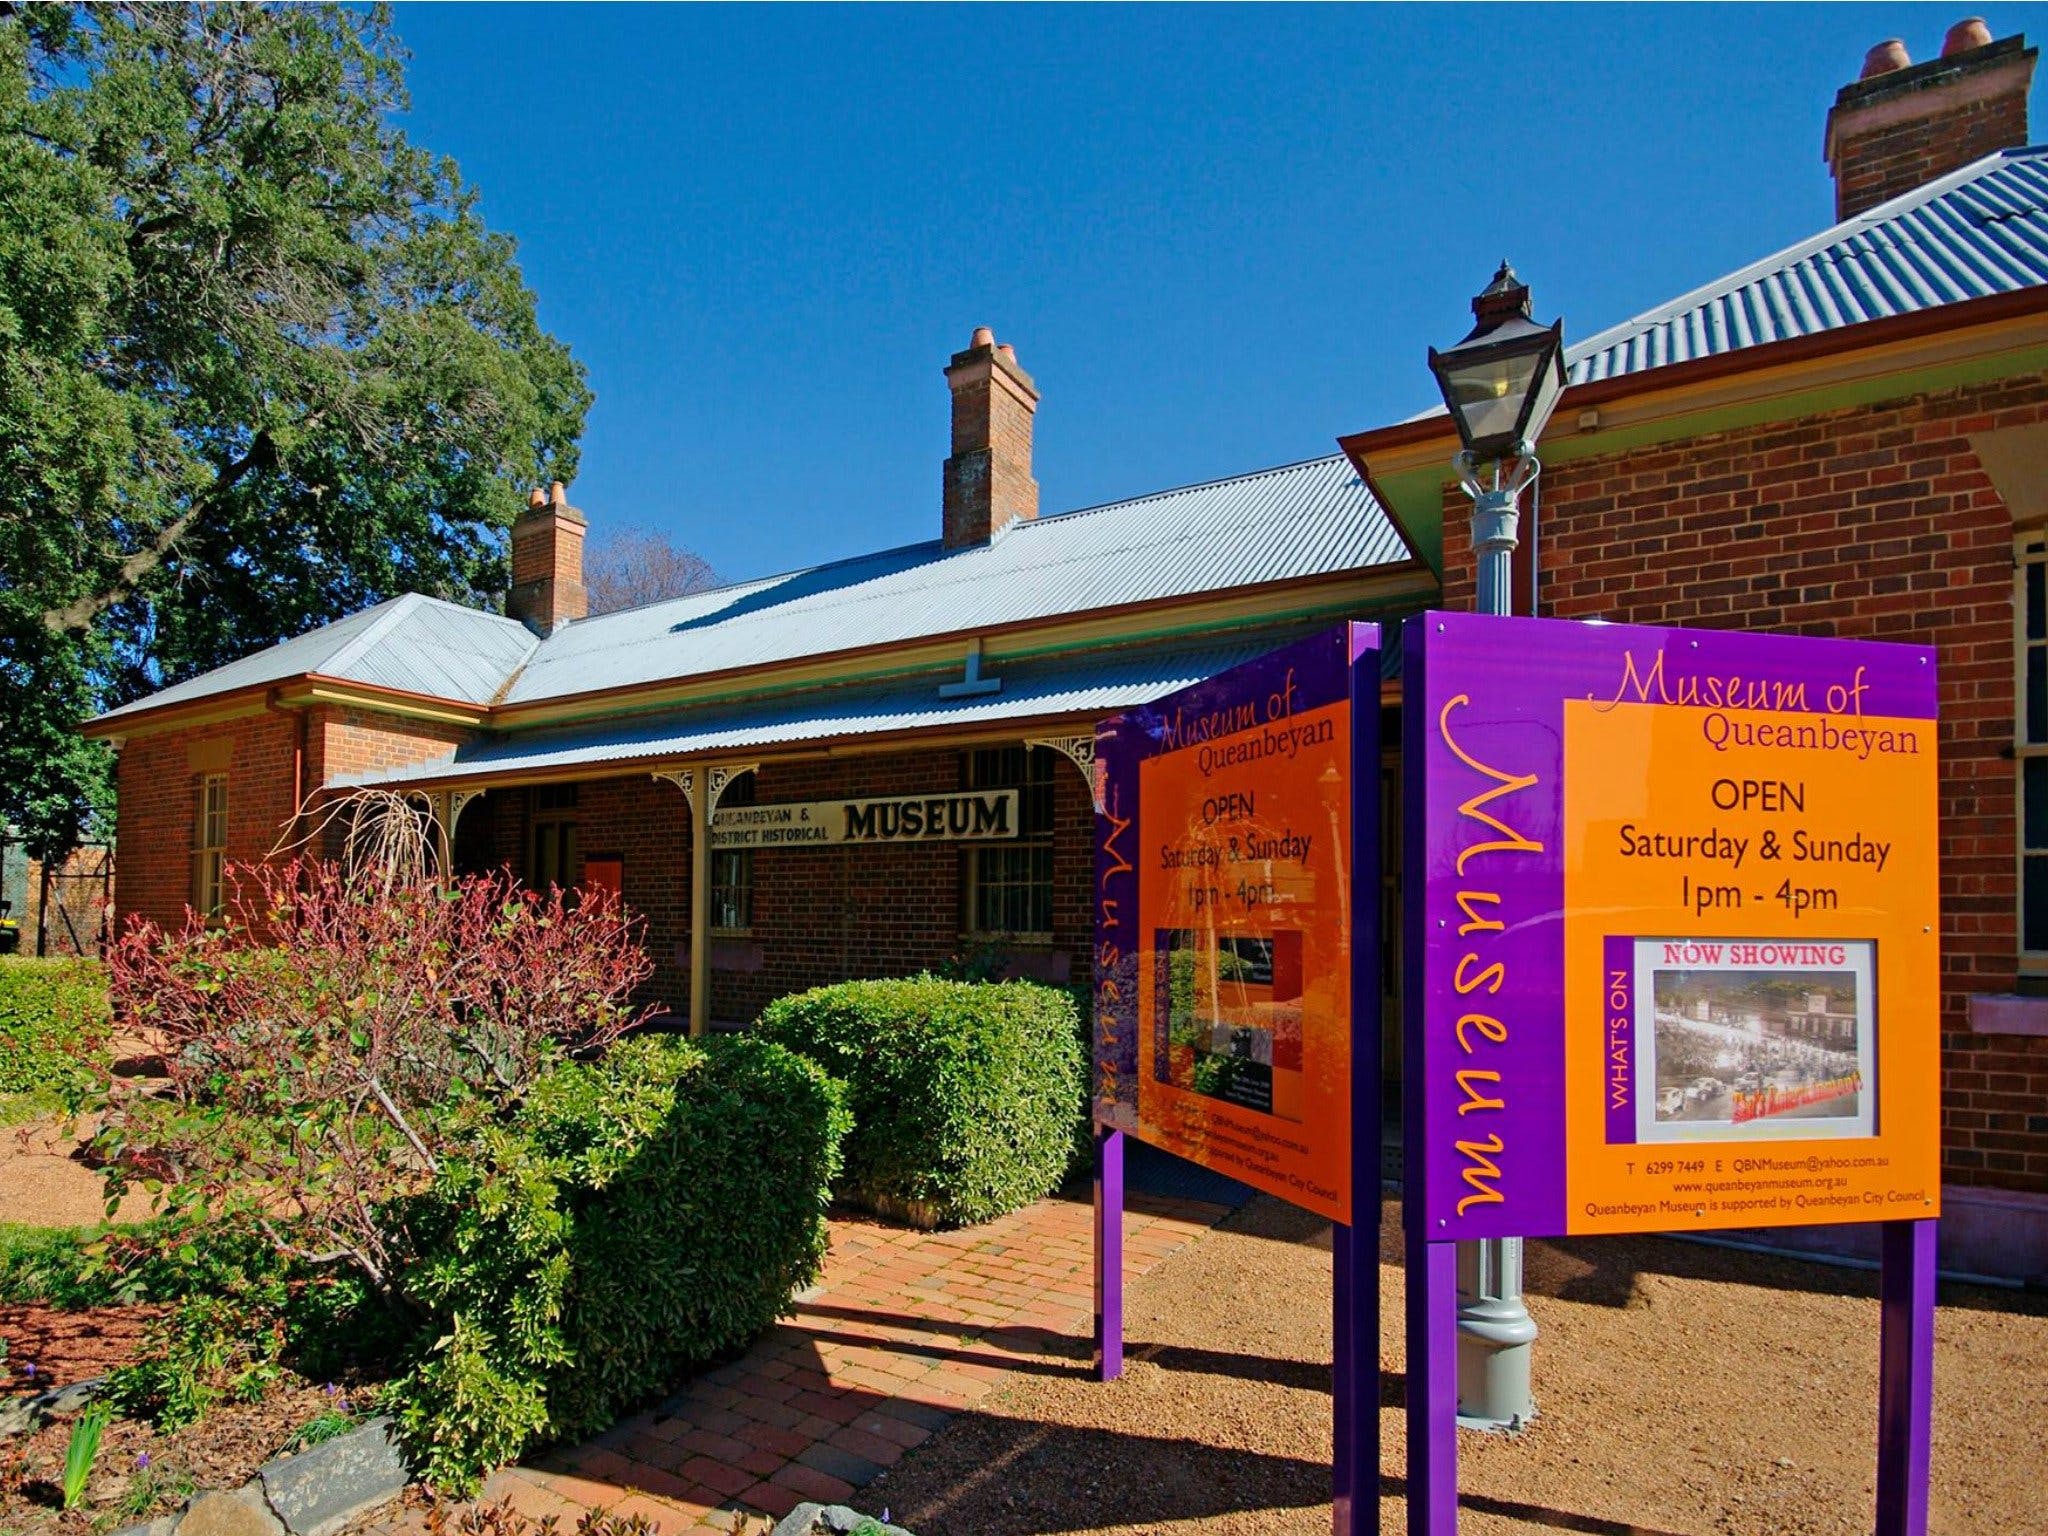 Queanbeyan Museum - New South Wales Tourism 